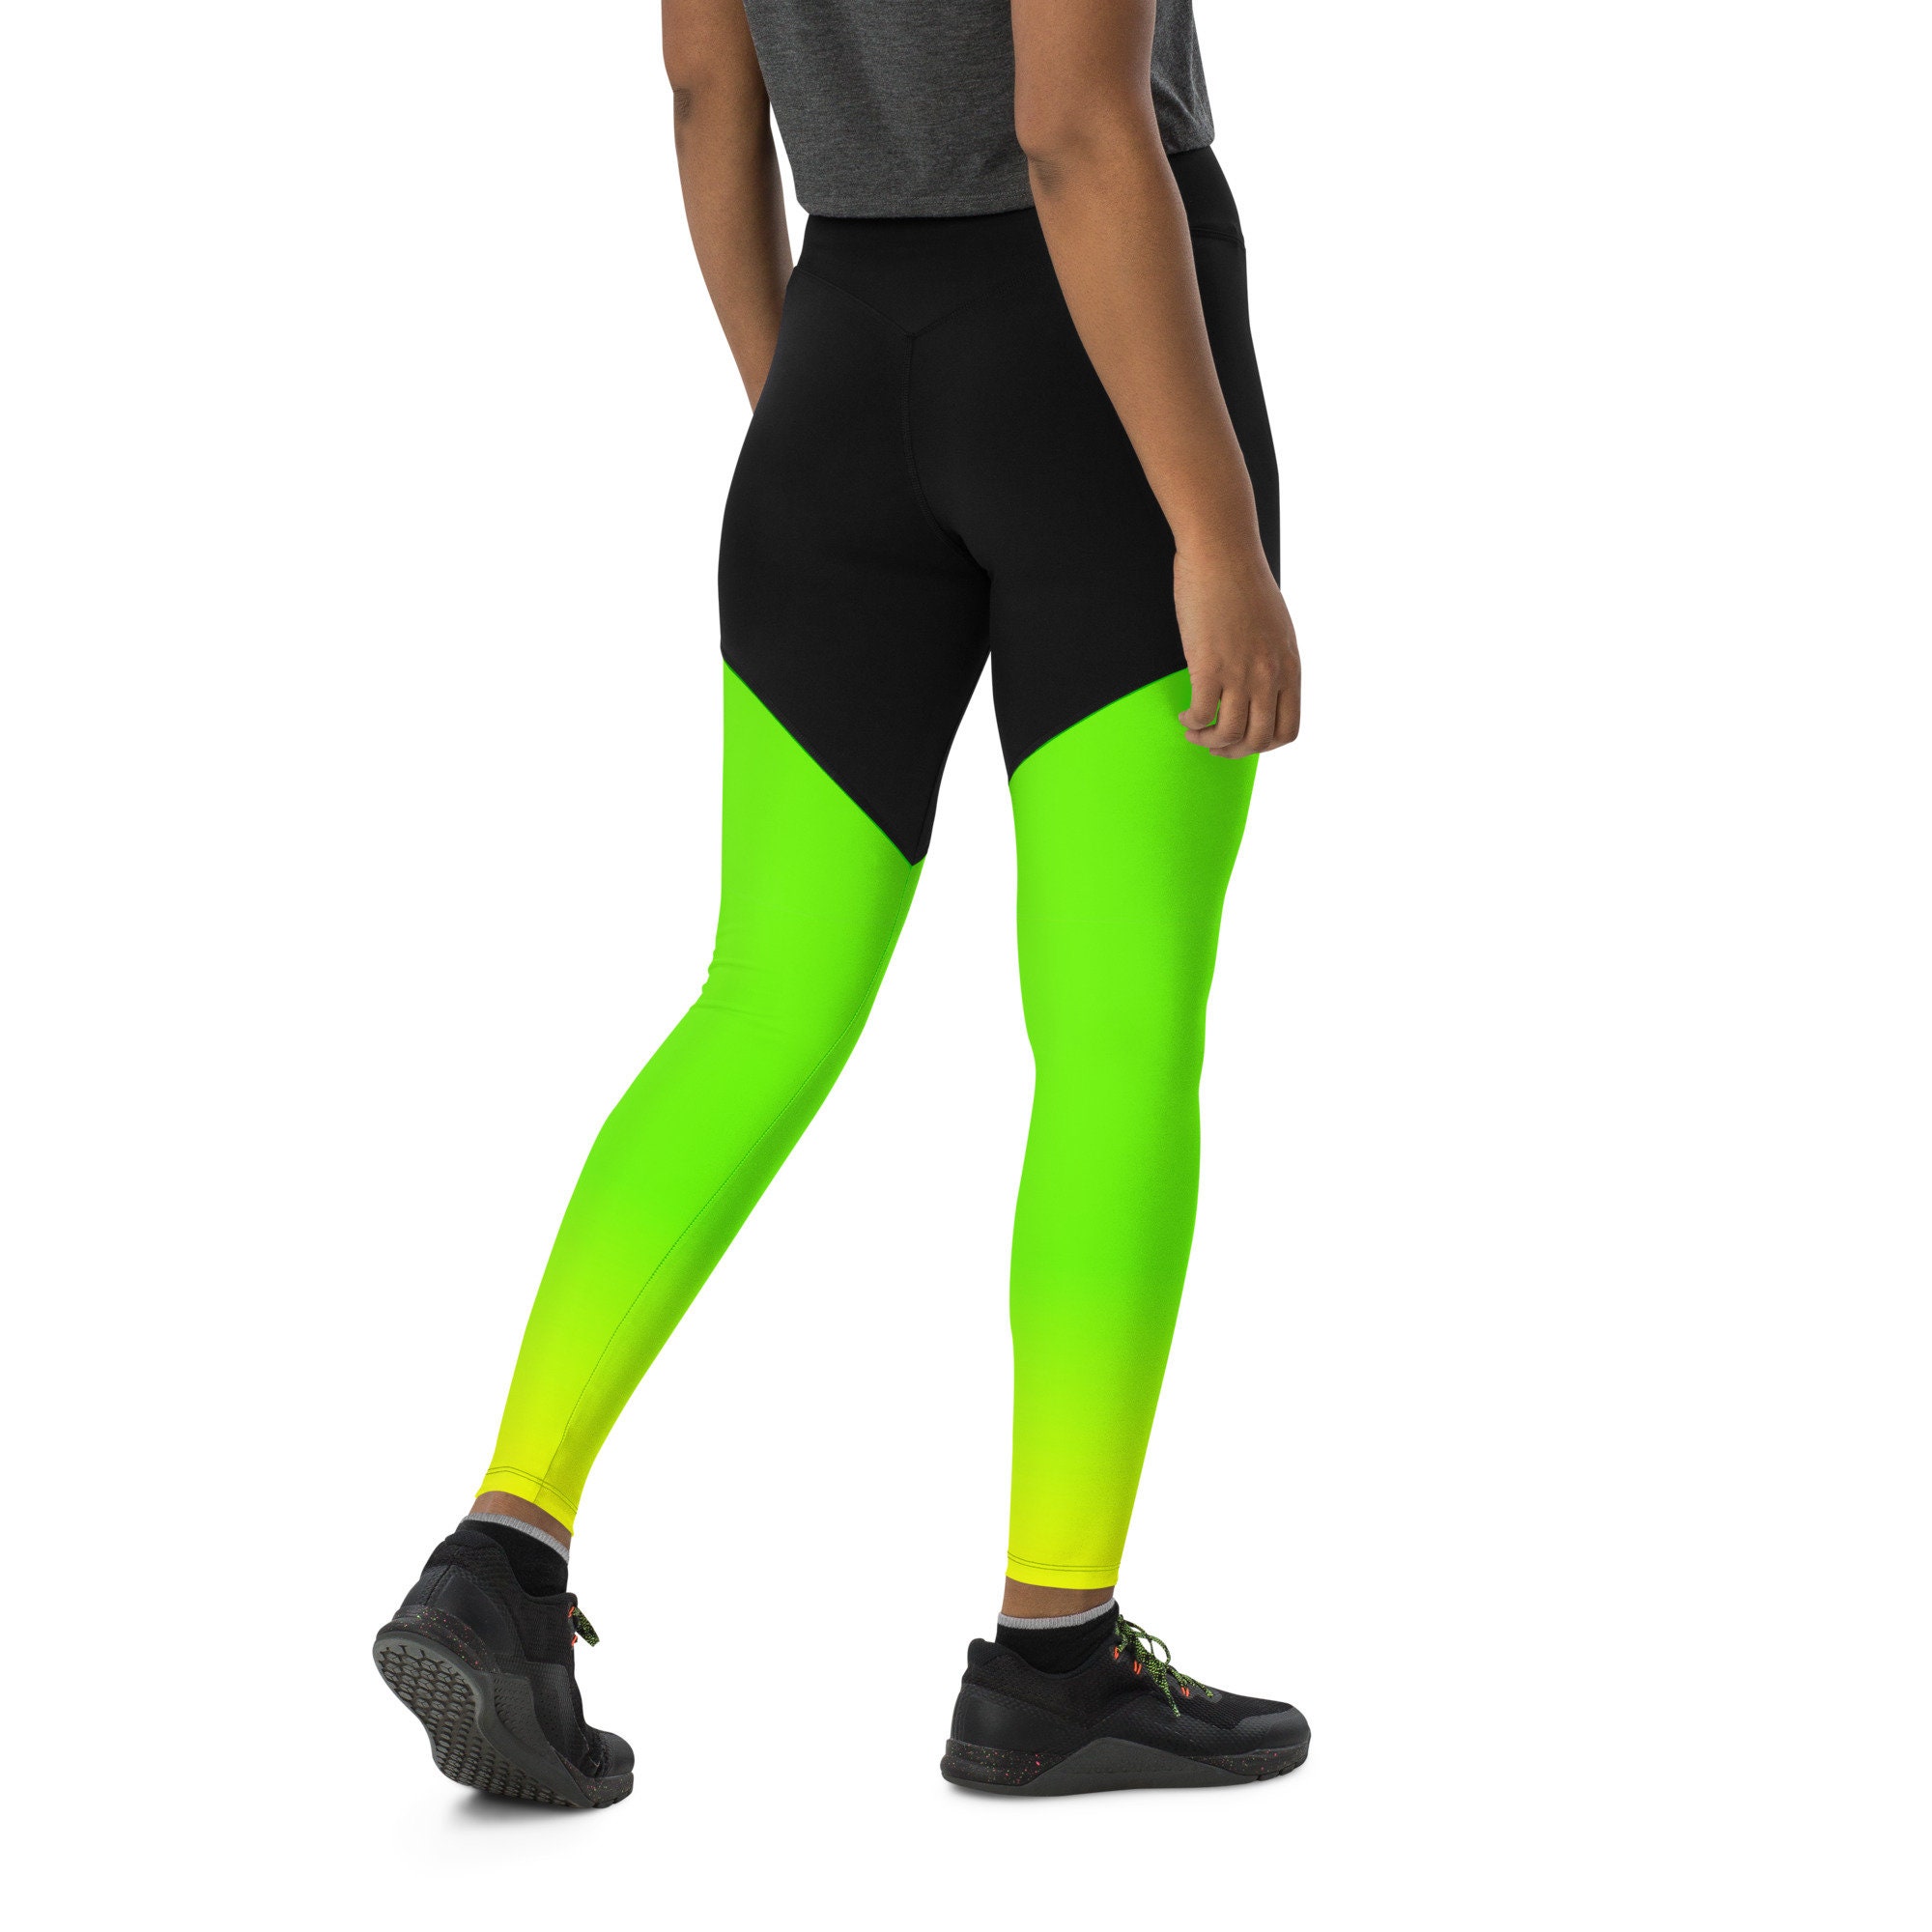 Neon Lime Green & Black Compression Sports Leggings / Butt Lifting